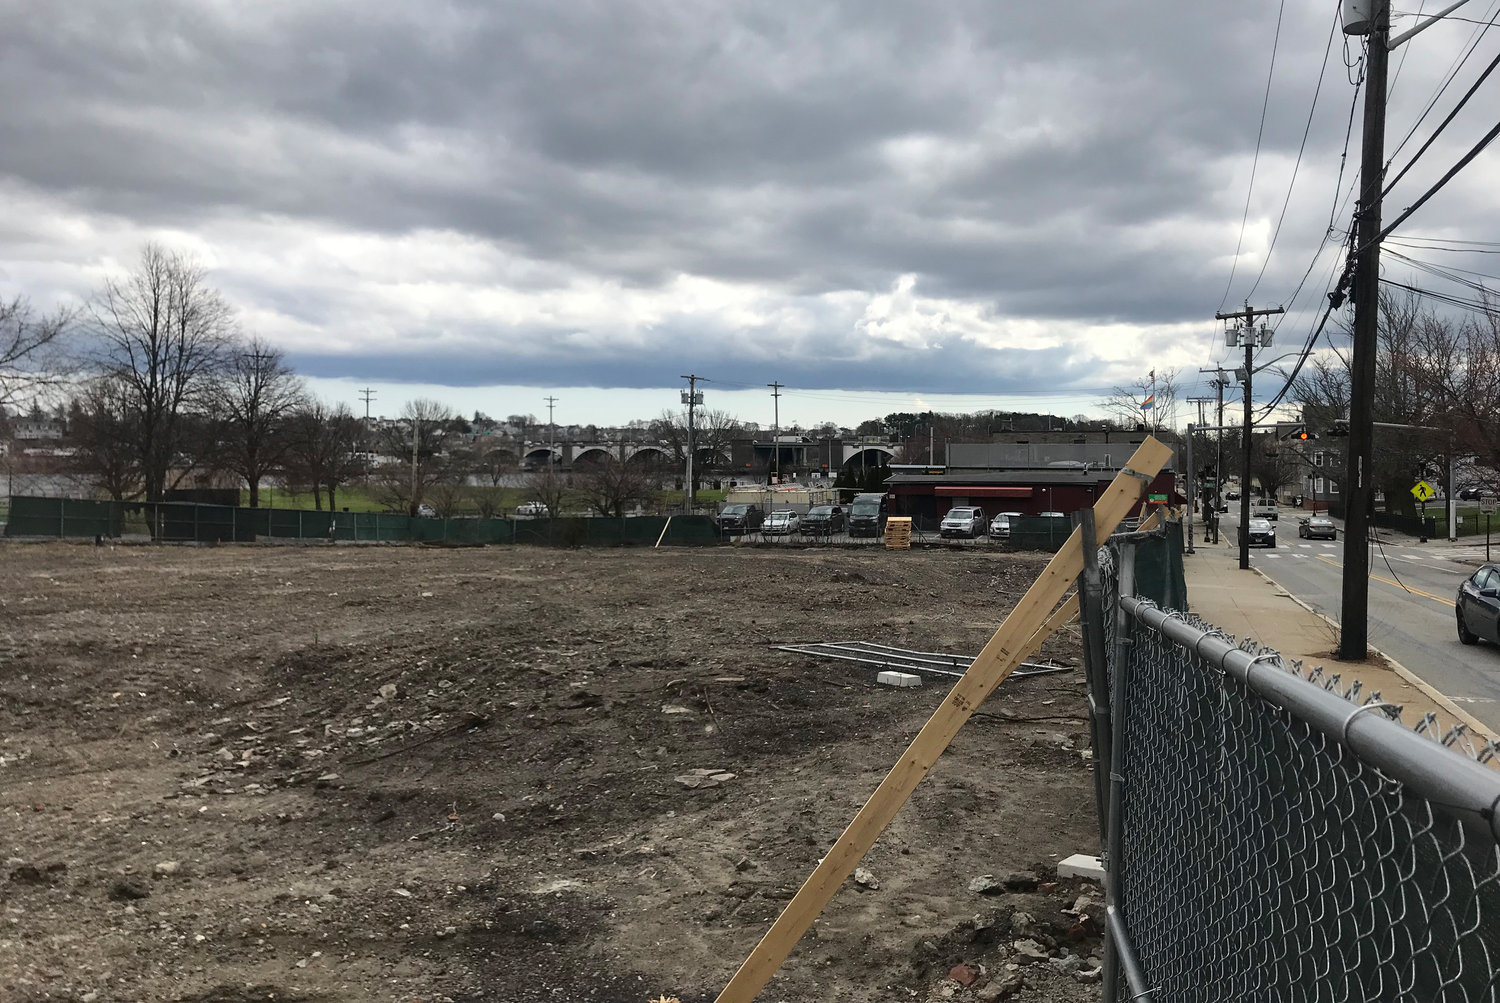 Fox Point neighbors are concerned about increased congestion at the site of a new development on Gano Street, near the Gano Street ball fields and community garden